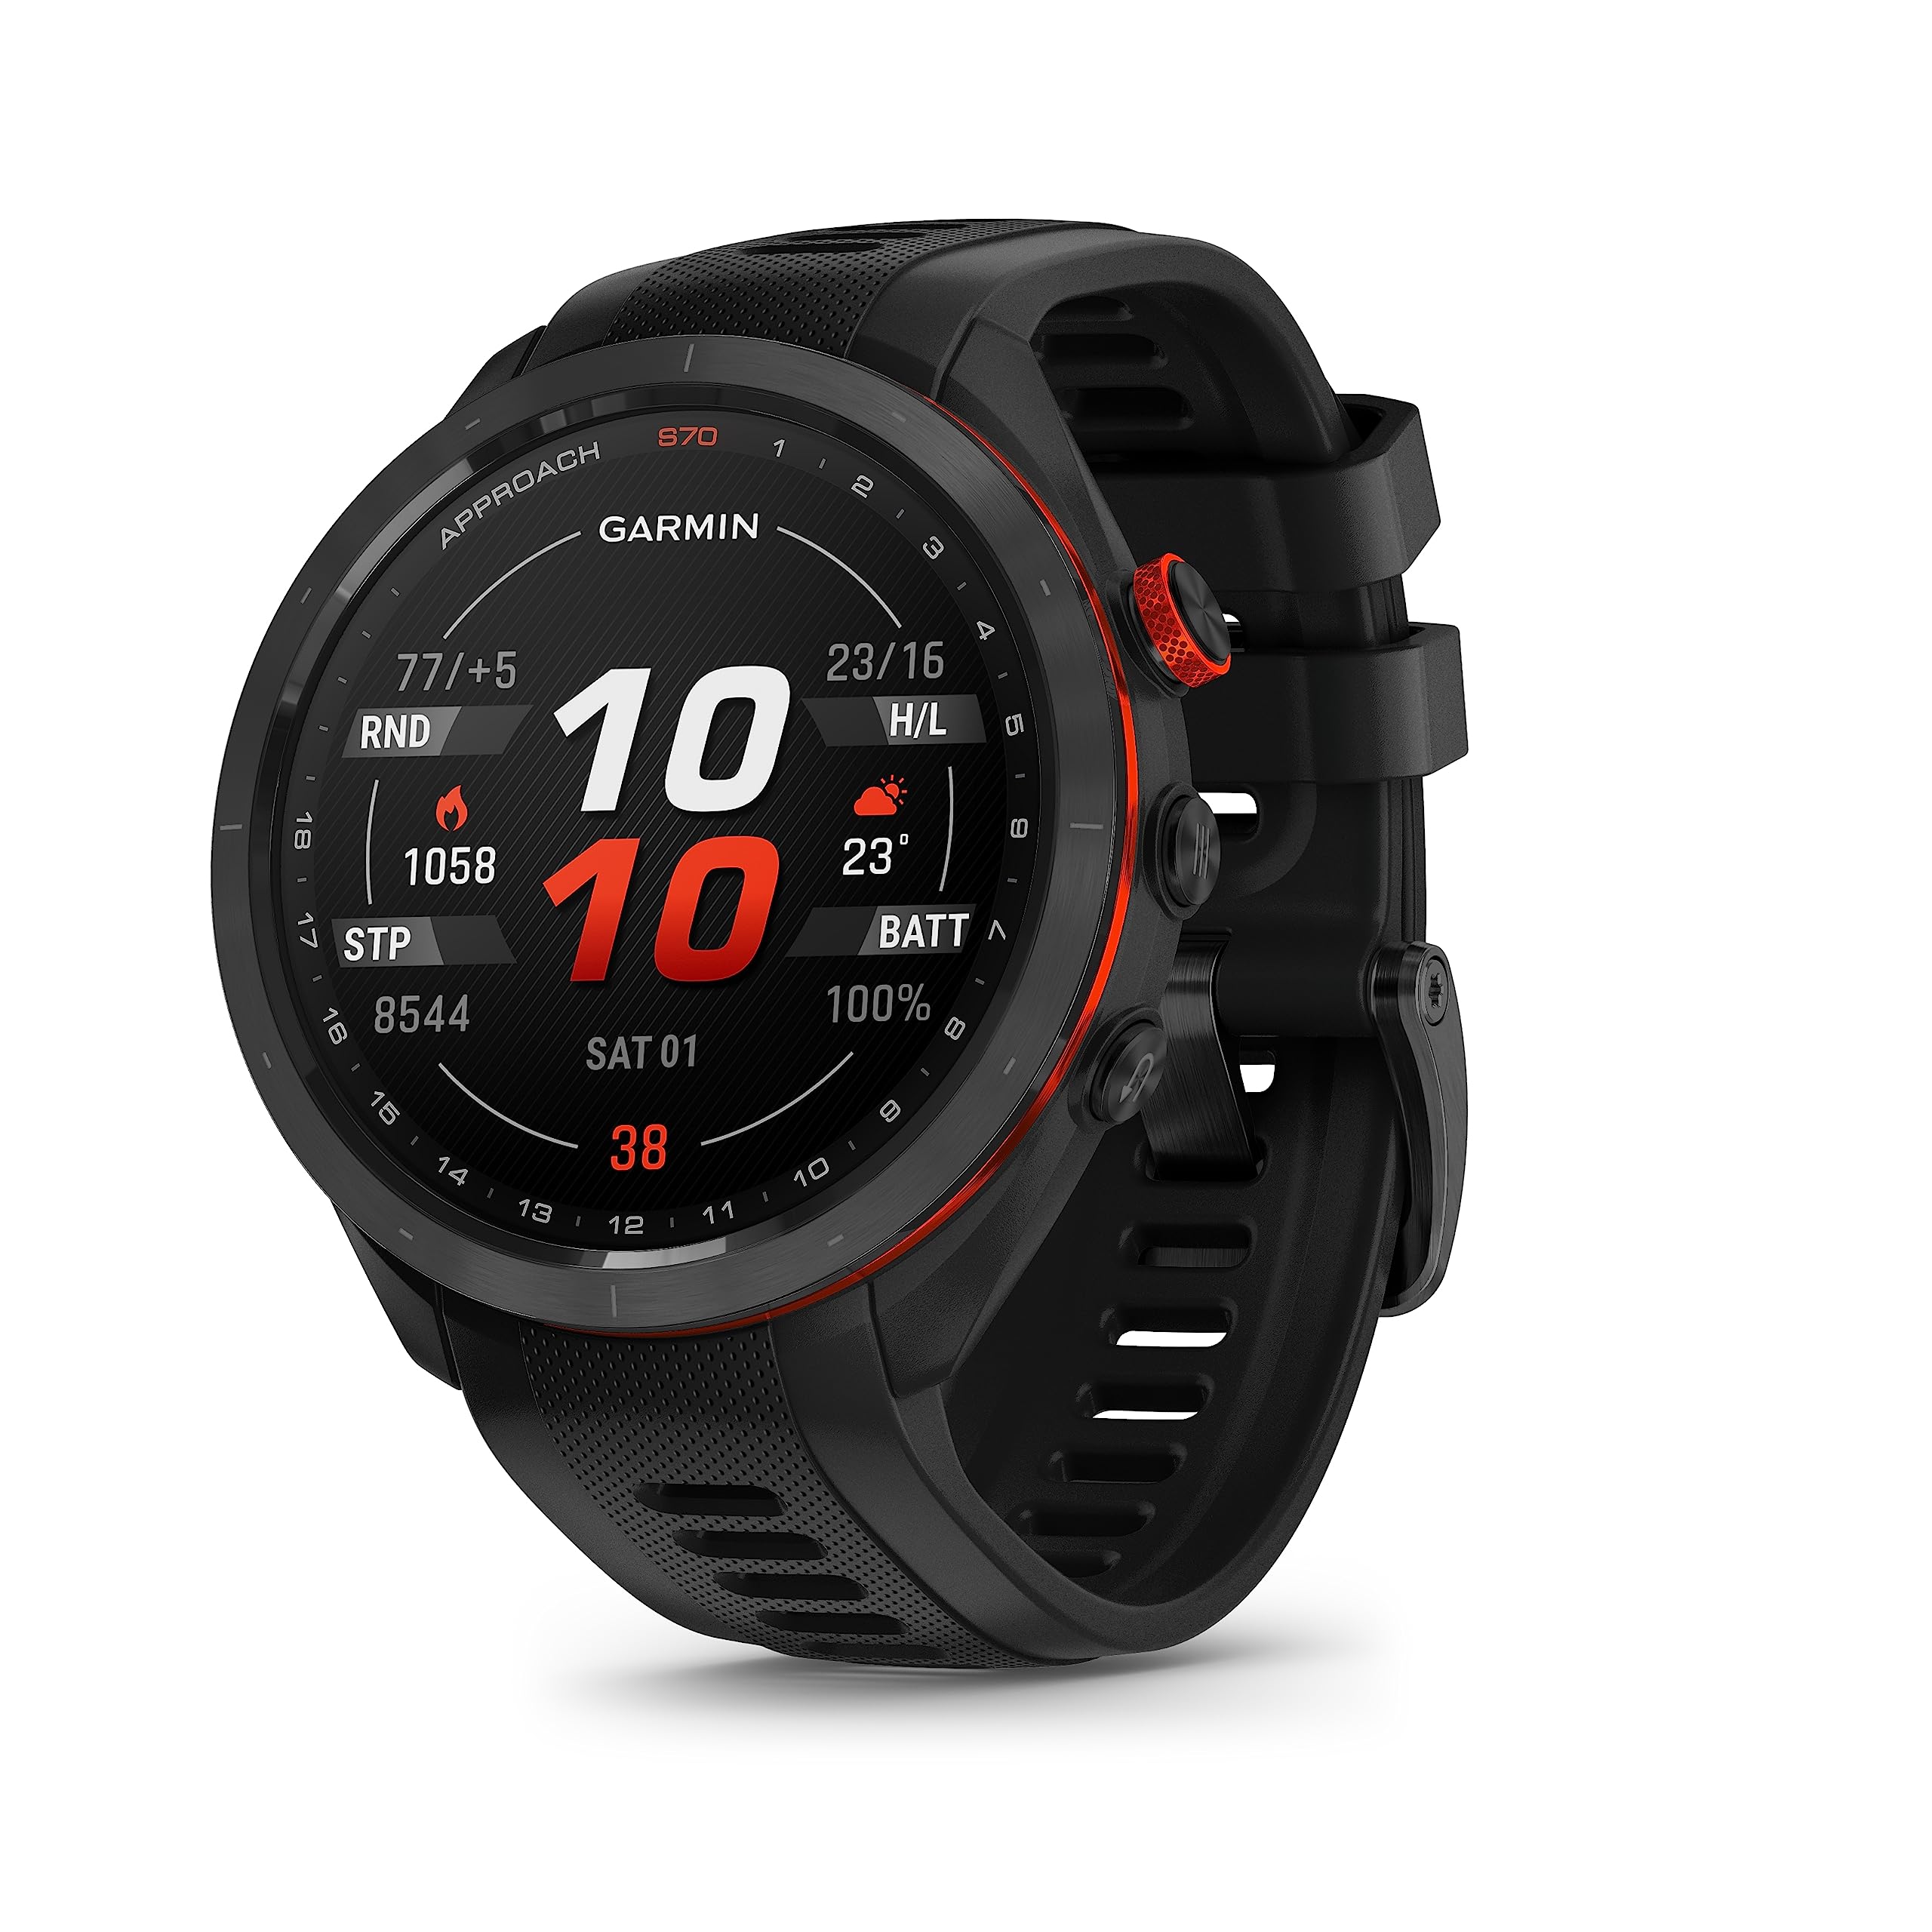 Garmin Updates Flagship Smartwatches with Significant Software Improvements